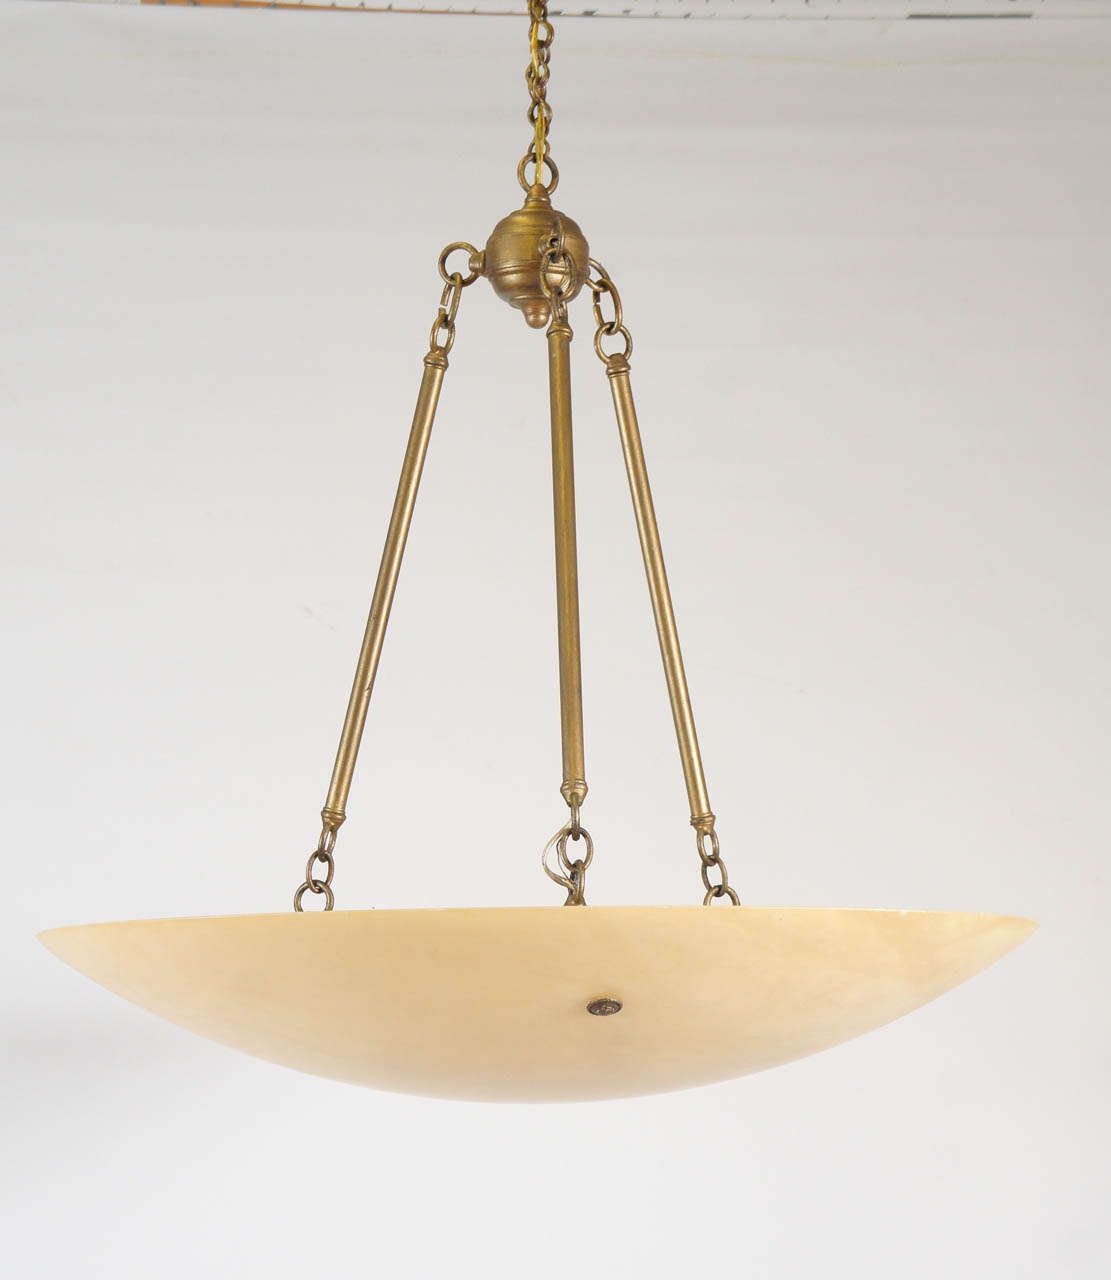 A large high quality handmade neoclassical style alabaster hanging fixture with antiqued metal elements.  OAH to the top of the ring before chain is 30